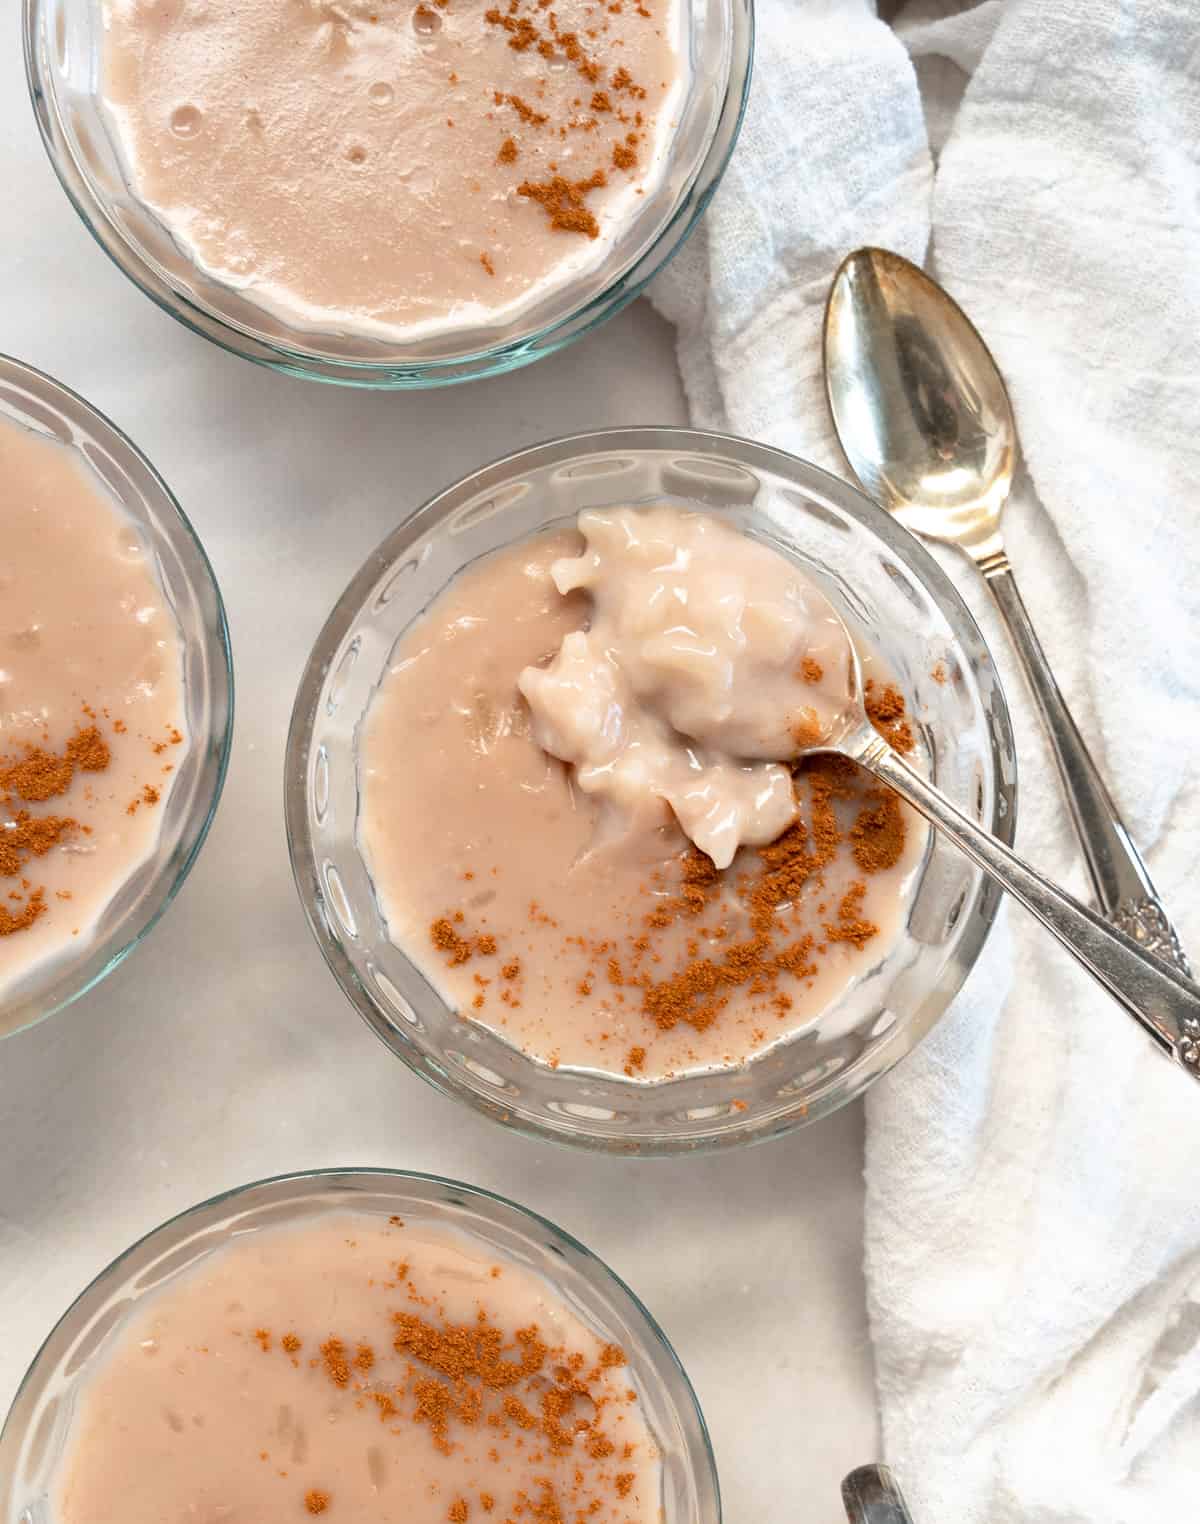 pinkish rice pudding in a bowl with a teaspoon in it